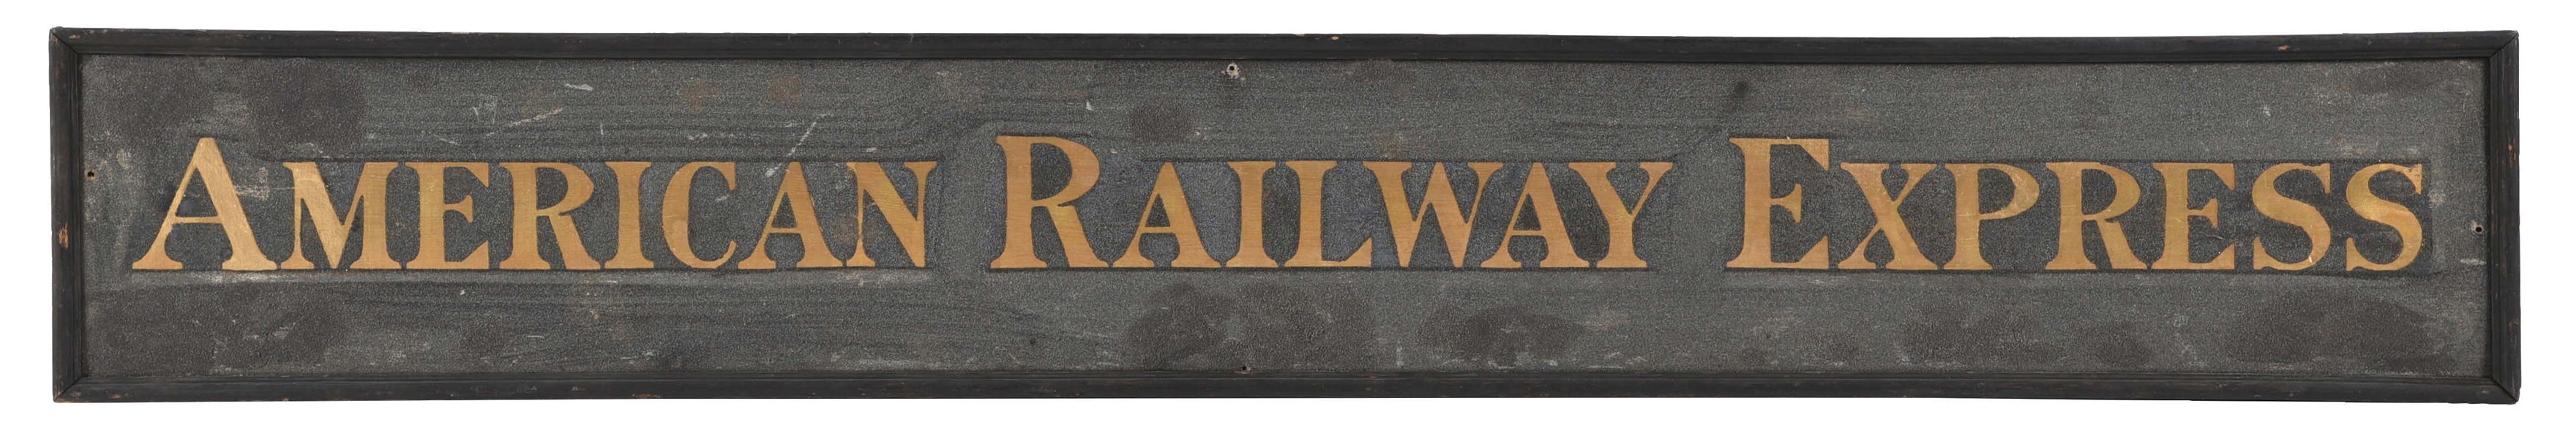 AMERICAN RAILWAY EXPRESS SMALTZ PAINTED WOODEN SIGN W/ WOODEN FRAME. 